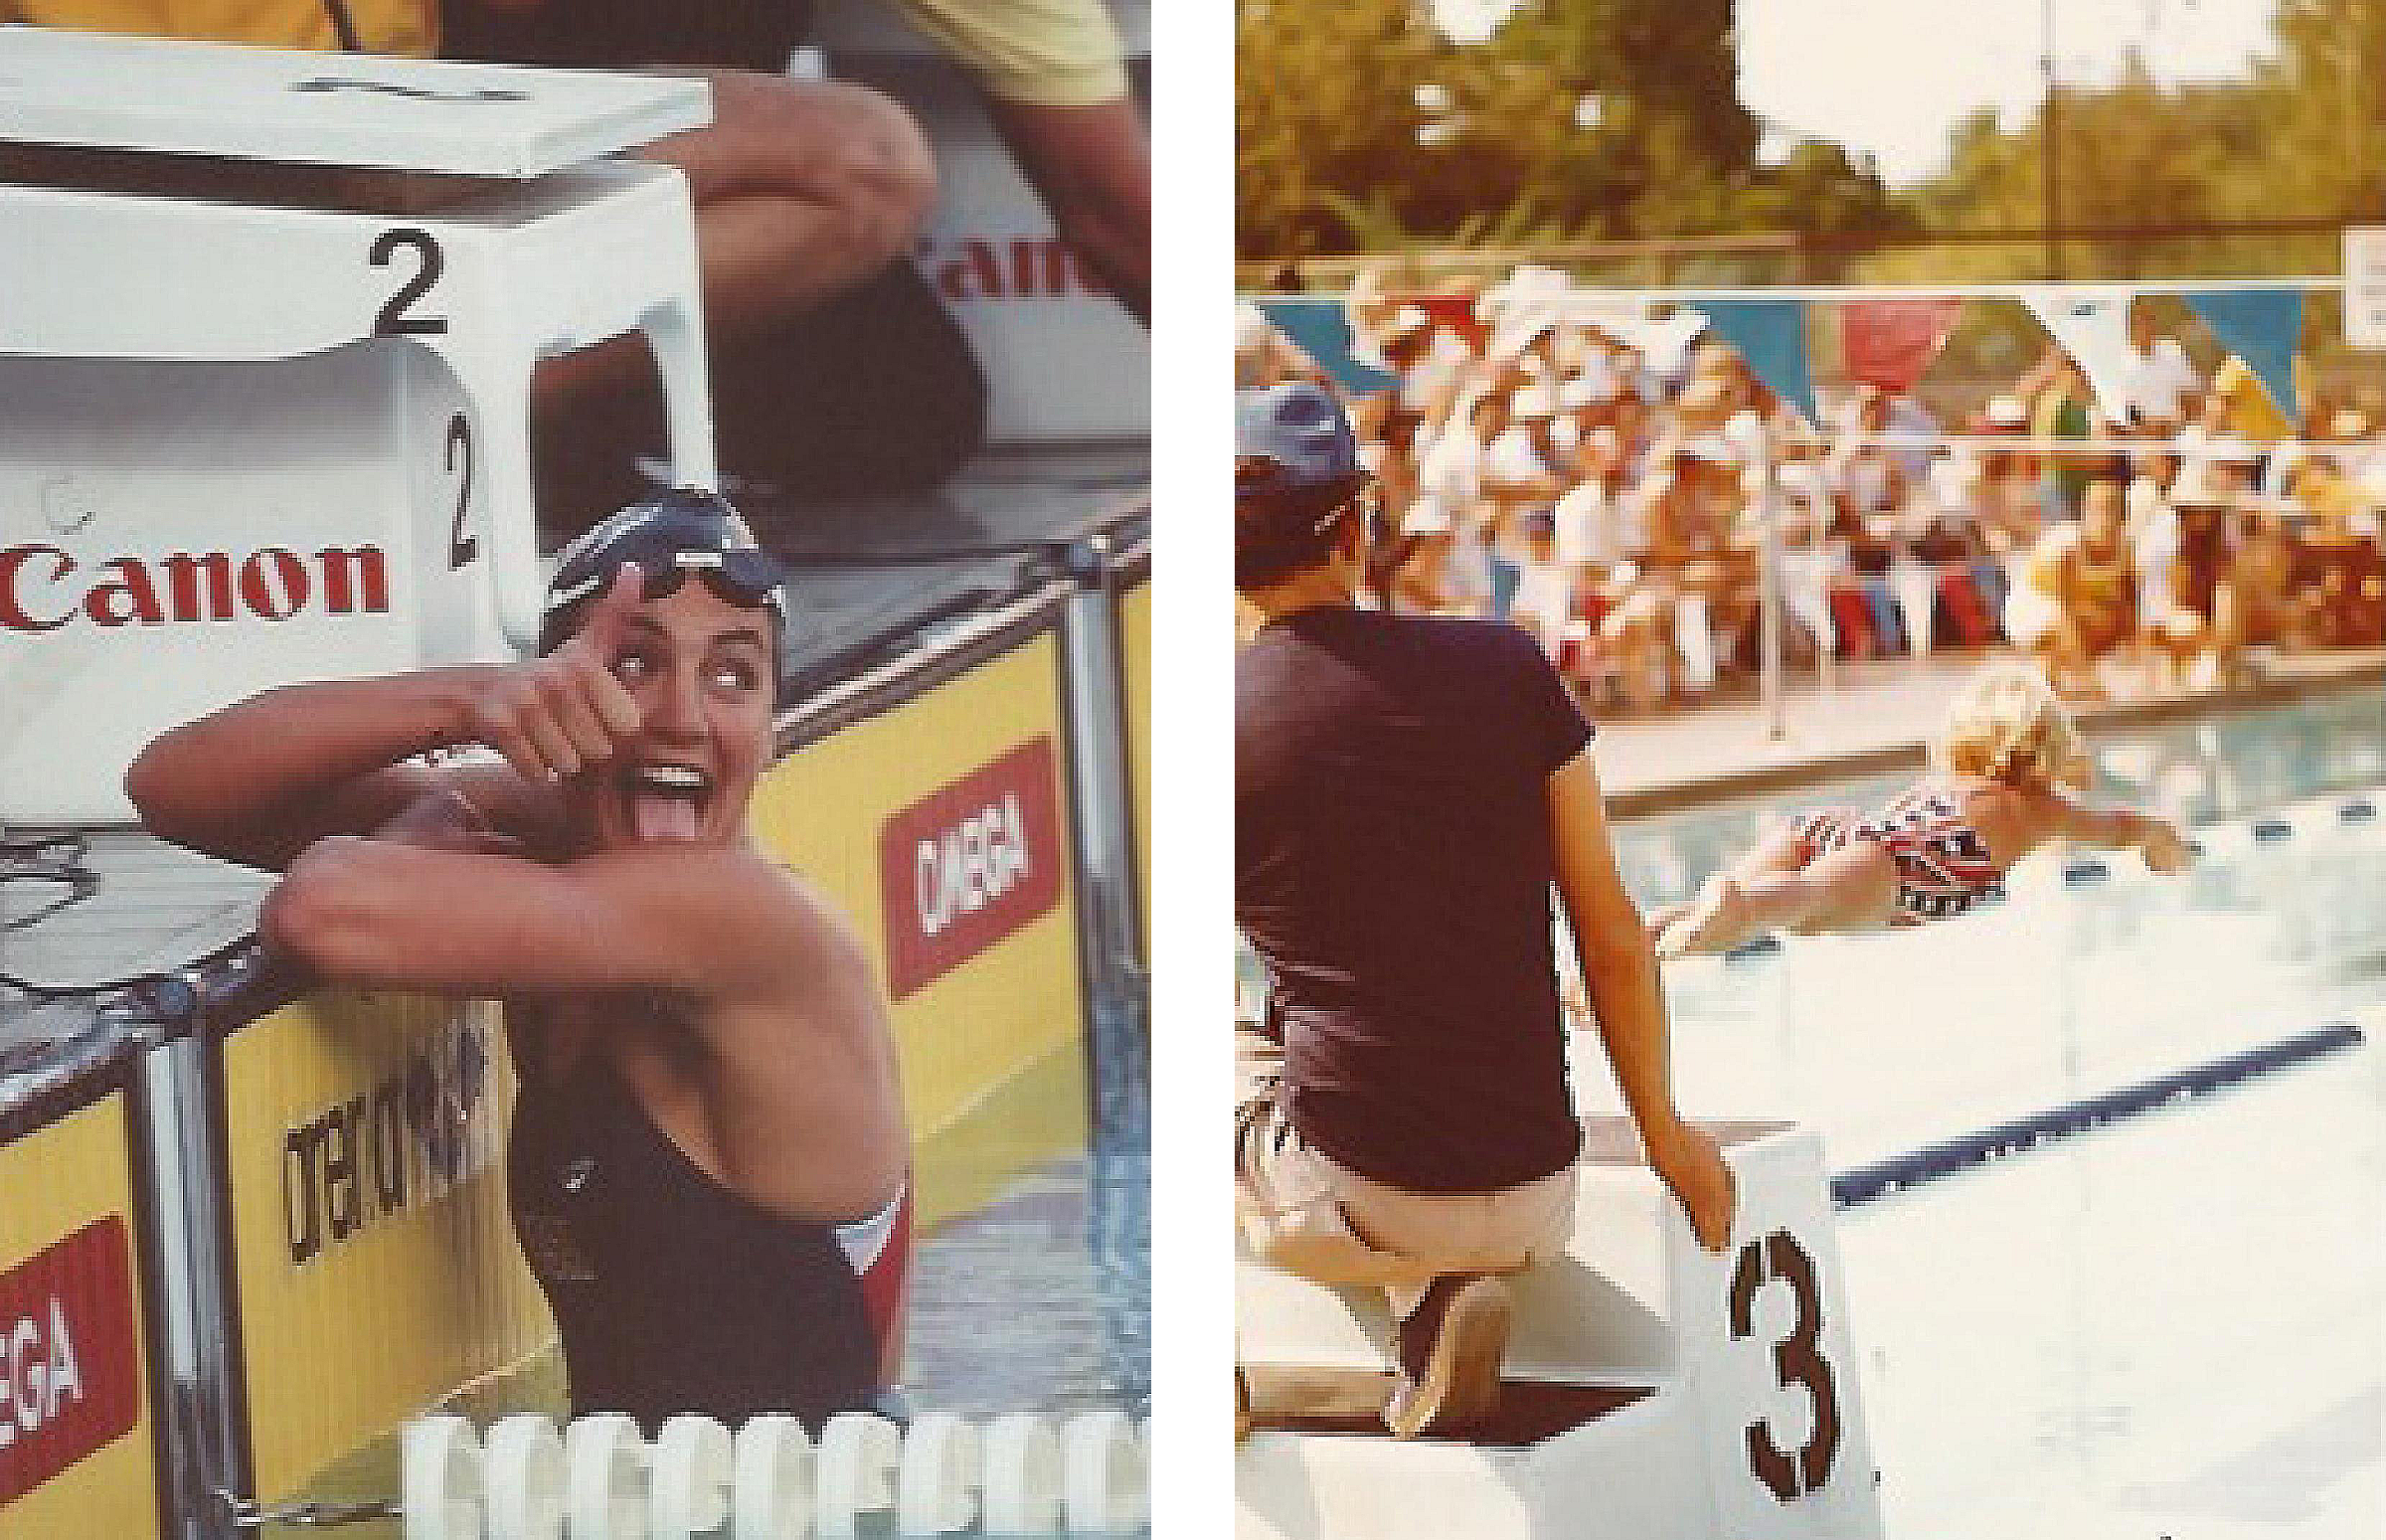 Left: Summer competing in the 200 meter butterfly competition at the World Championship in 1991; Right: Summer diving into a swimming pool when she was a child